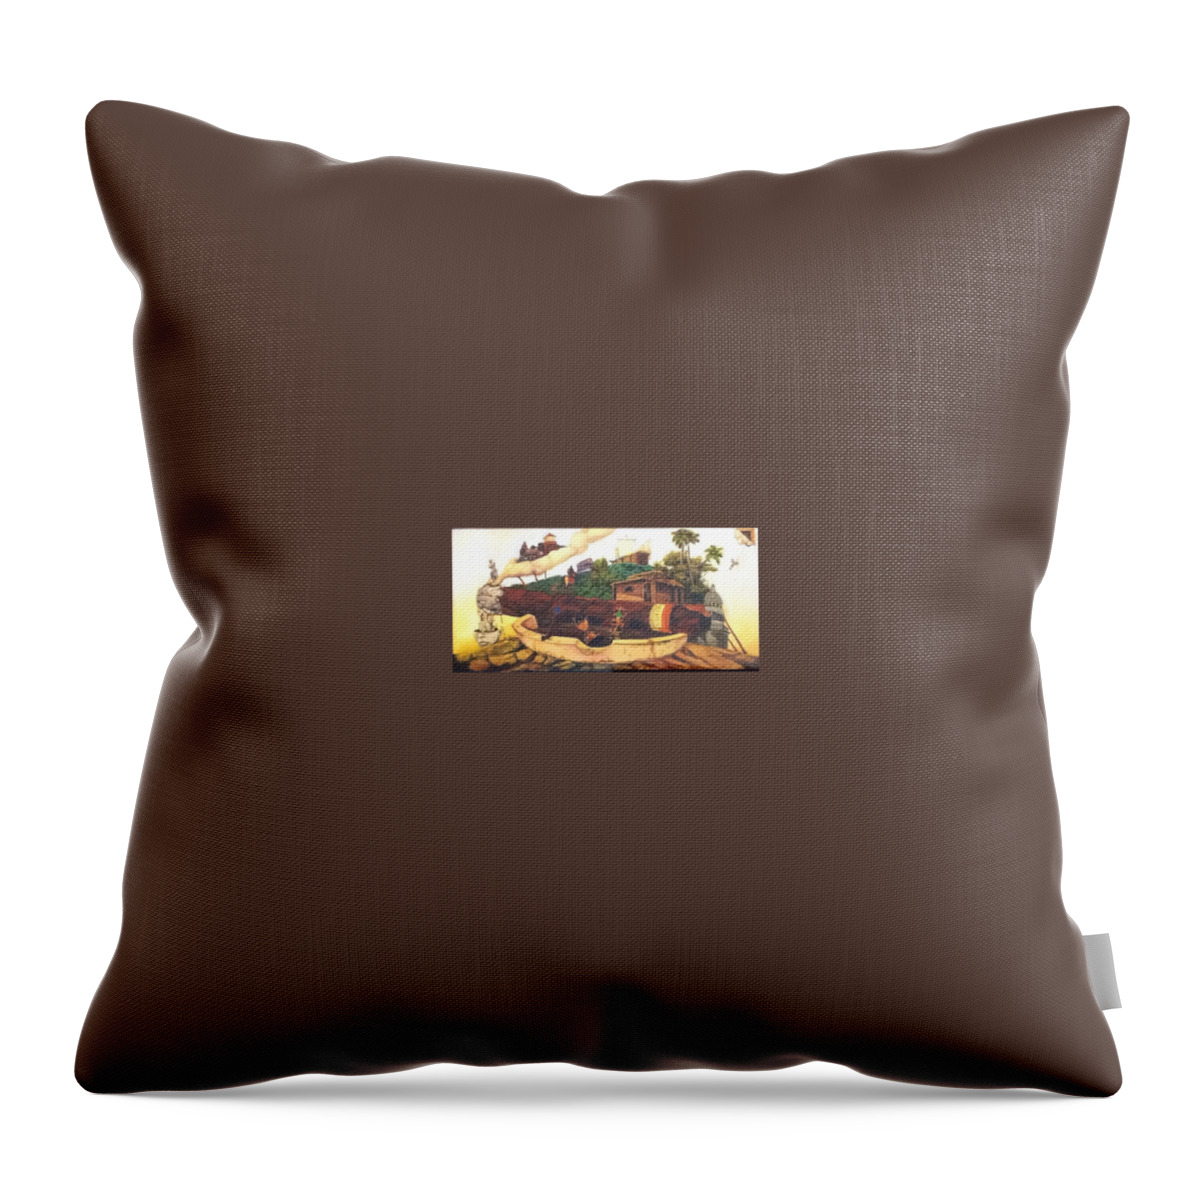  Throw Pillow featuring the painting Yours not Included by Carlos Rodriguez